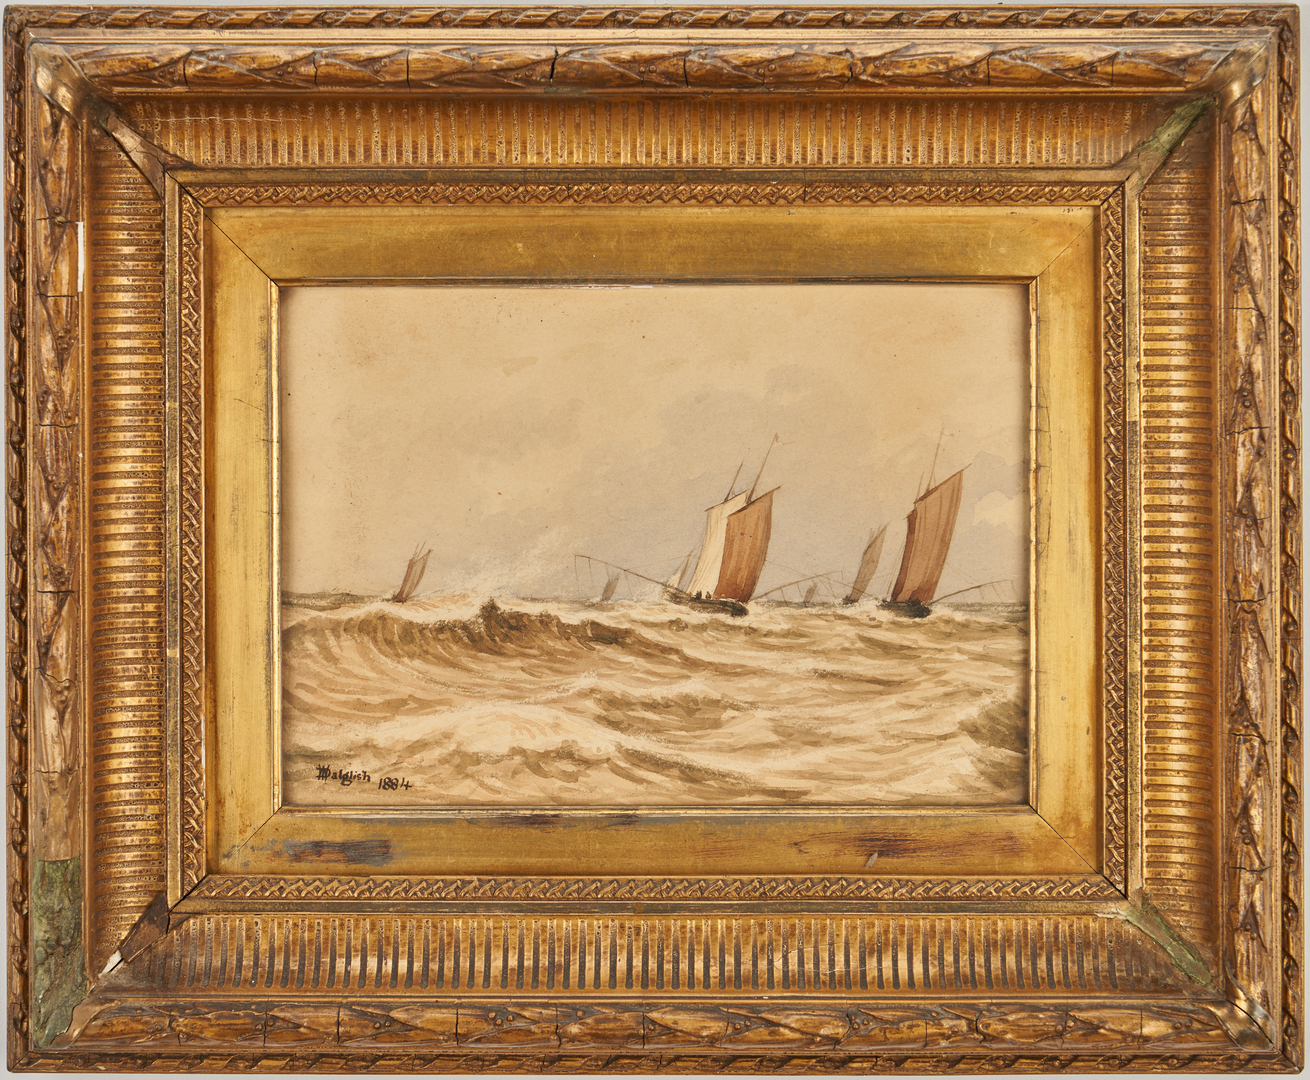 Lot 686: 2 Seascape Paintings by Daglish, Foster